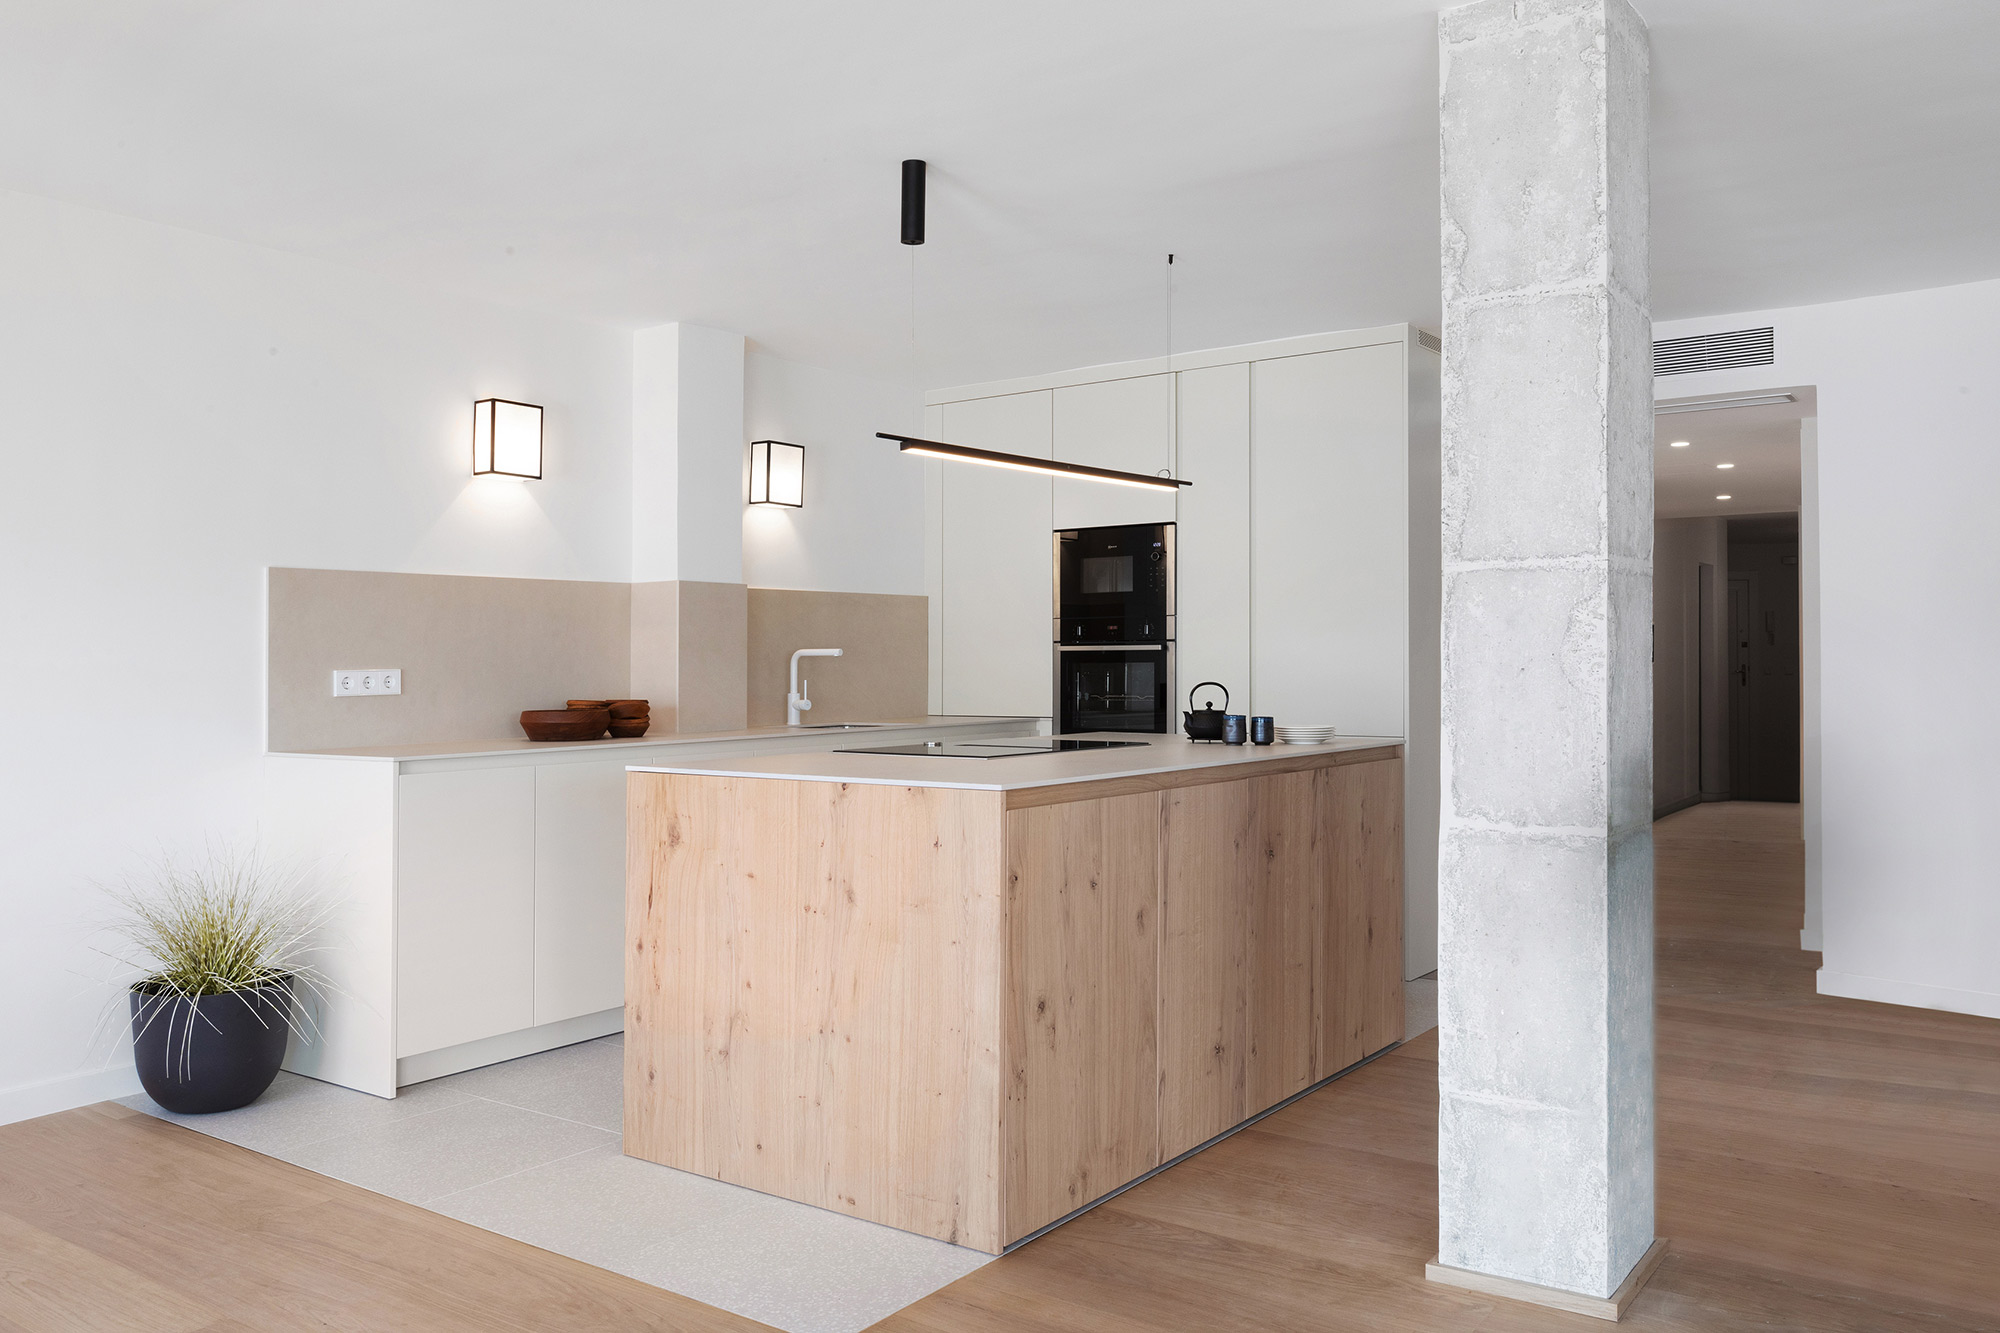 Image of Torrenova Mallorca 1 in Dekton, the perfect partner to make the most out of your holiday home - Cosentino